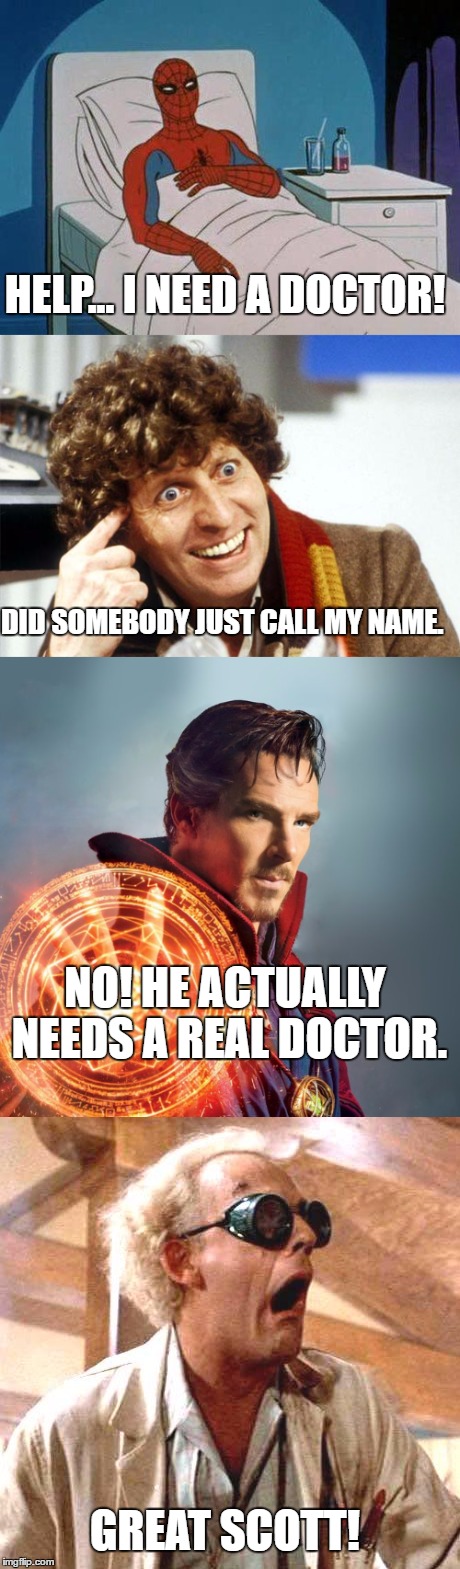 Spiderman Hospital | HELP... I NEED A DOCTOR! DID SOMEBODY JUST CALL MY NAME. NO! HE ACTUALLY NEEDS A REAL DOCTOR. GREAT SCOTT! | image tagged in memes,spiderman,doctor who,doctor strange,back to the future | made w/ Imgflip meme maker